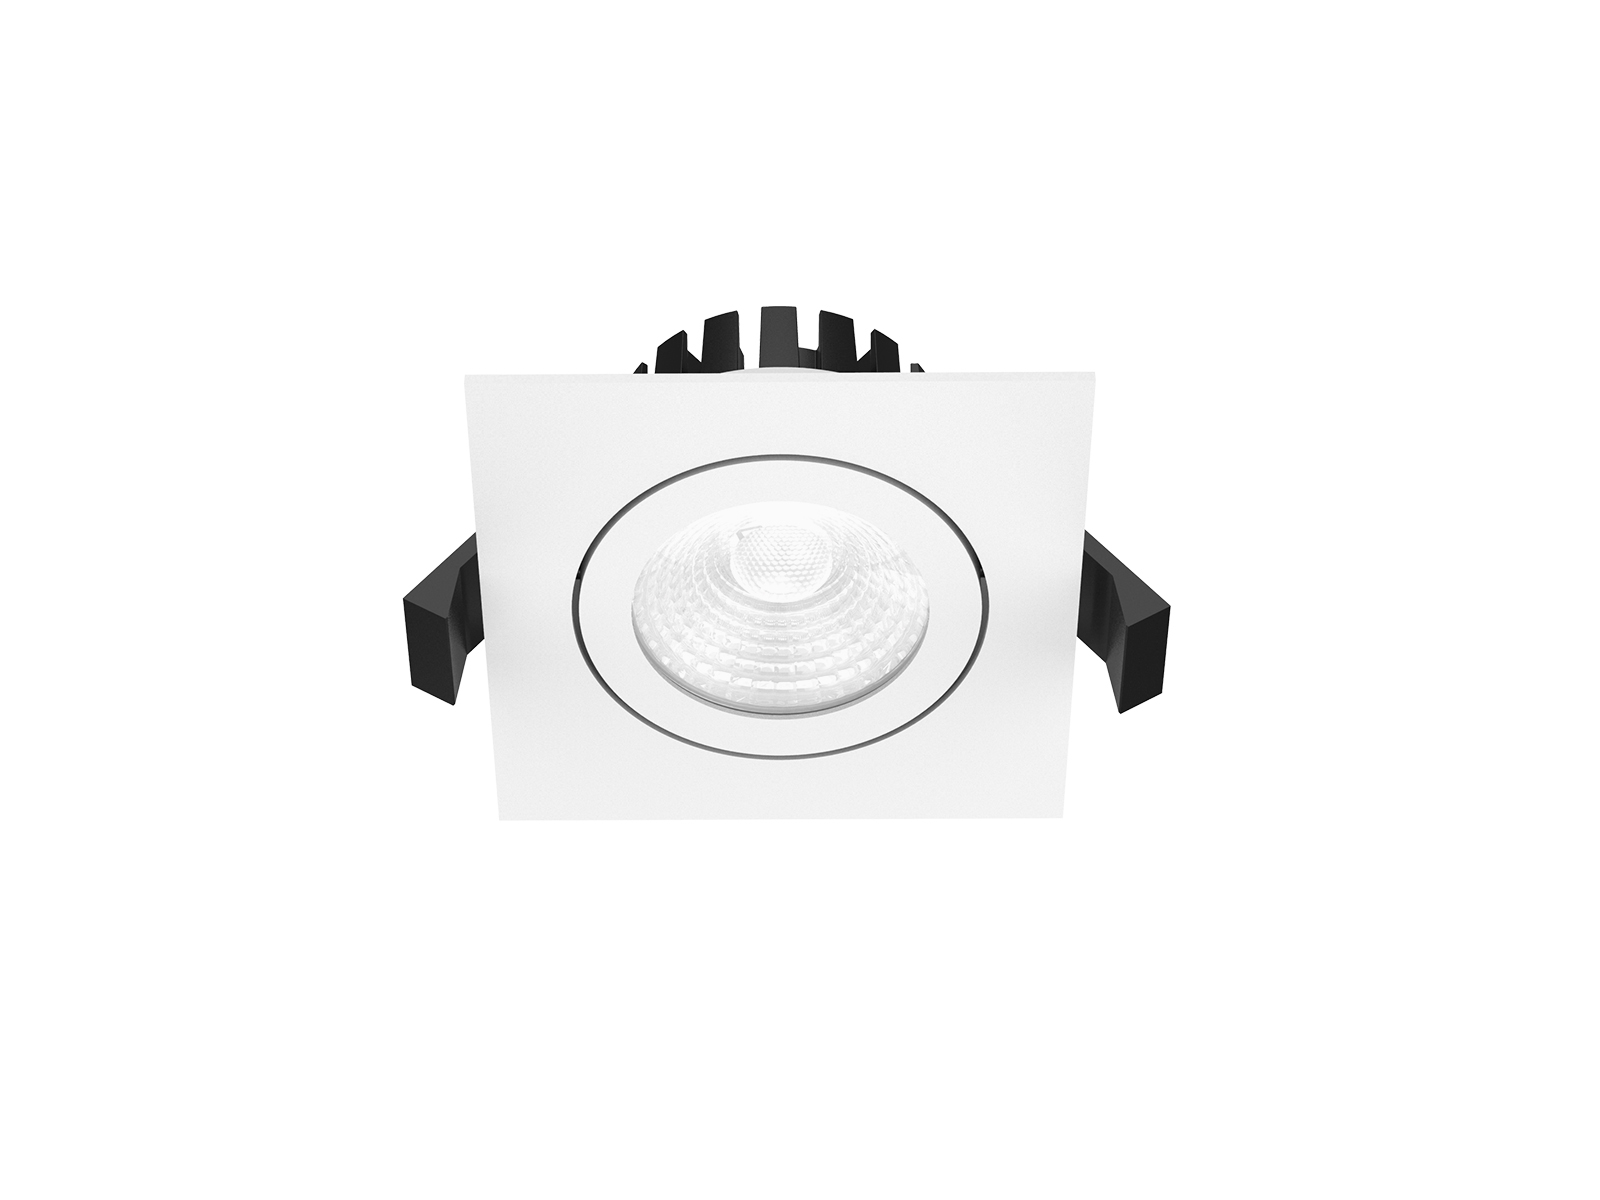 2.5 Inch Square Adjustable LED Downlight